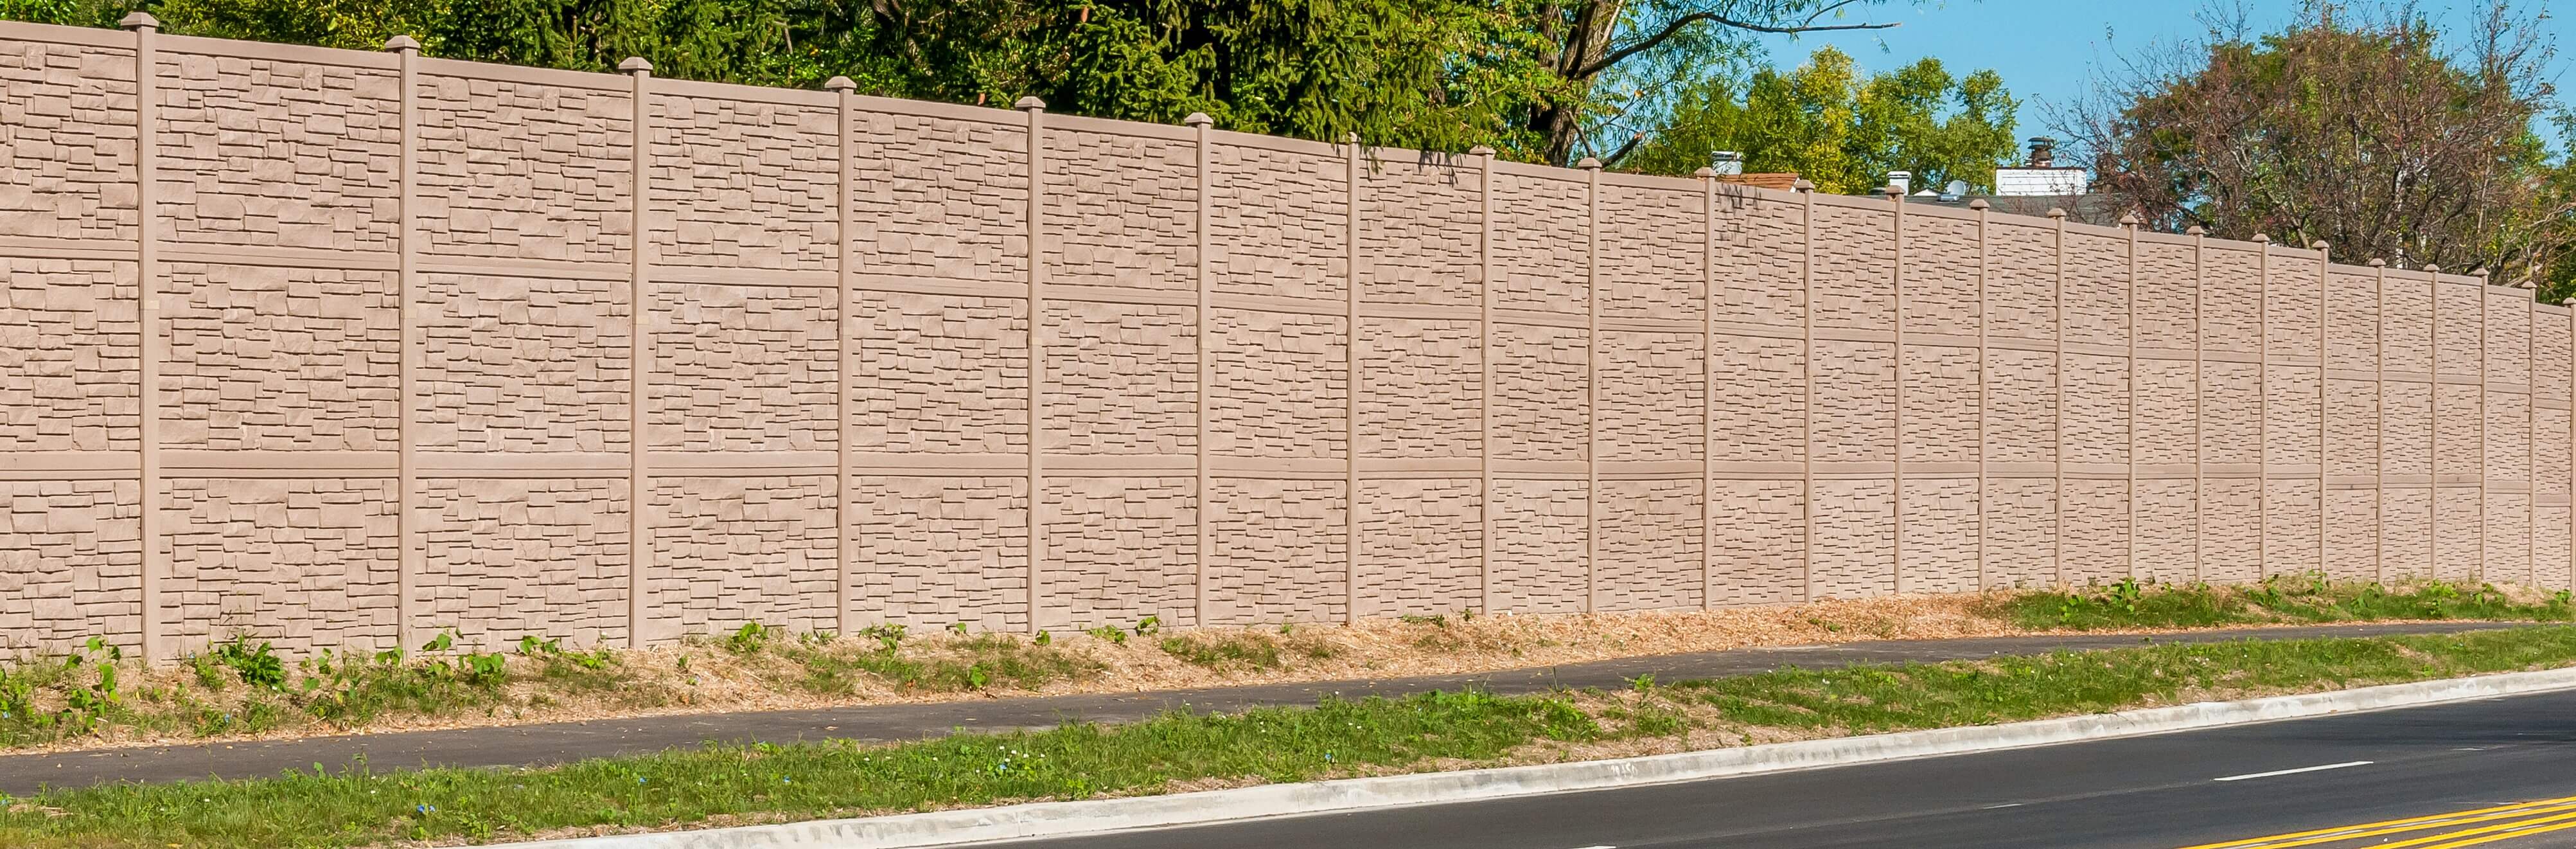 12' Tall Sound Wall - Simulated Stone